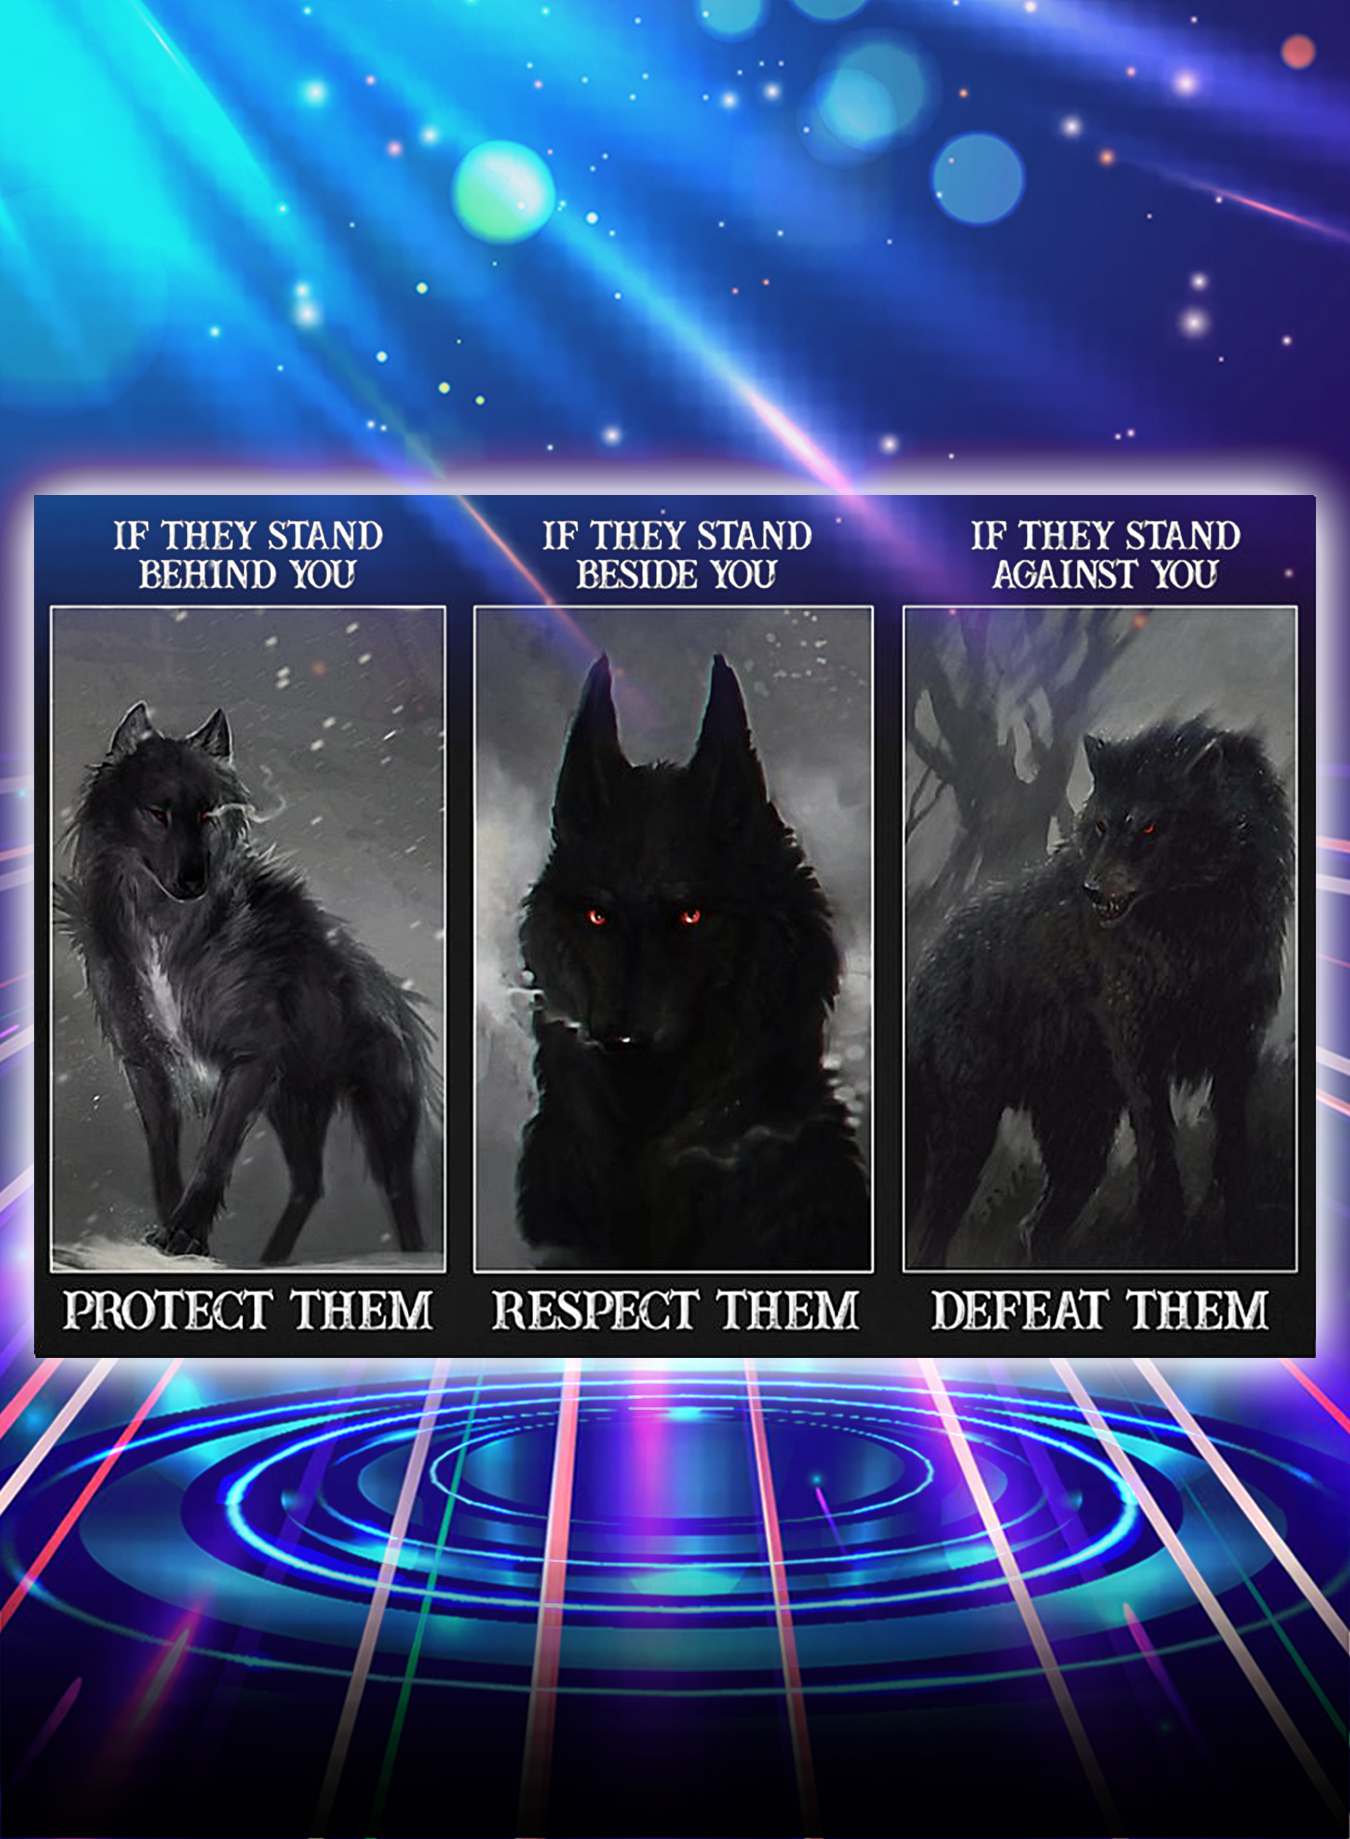 Wolf if they stand behind you protect them poster - A3